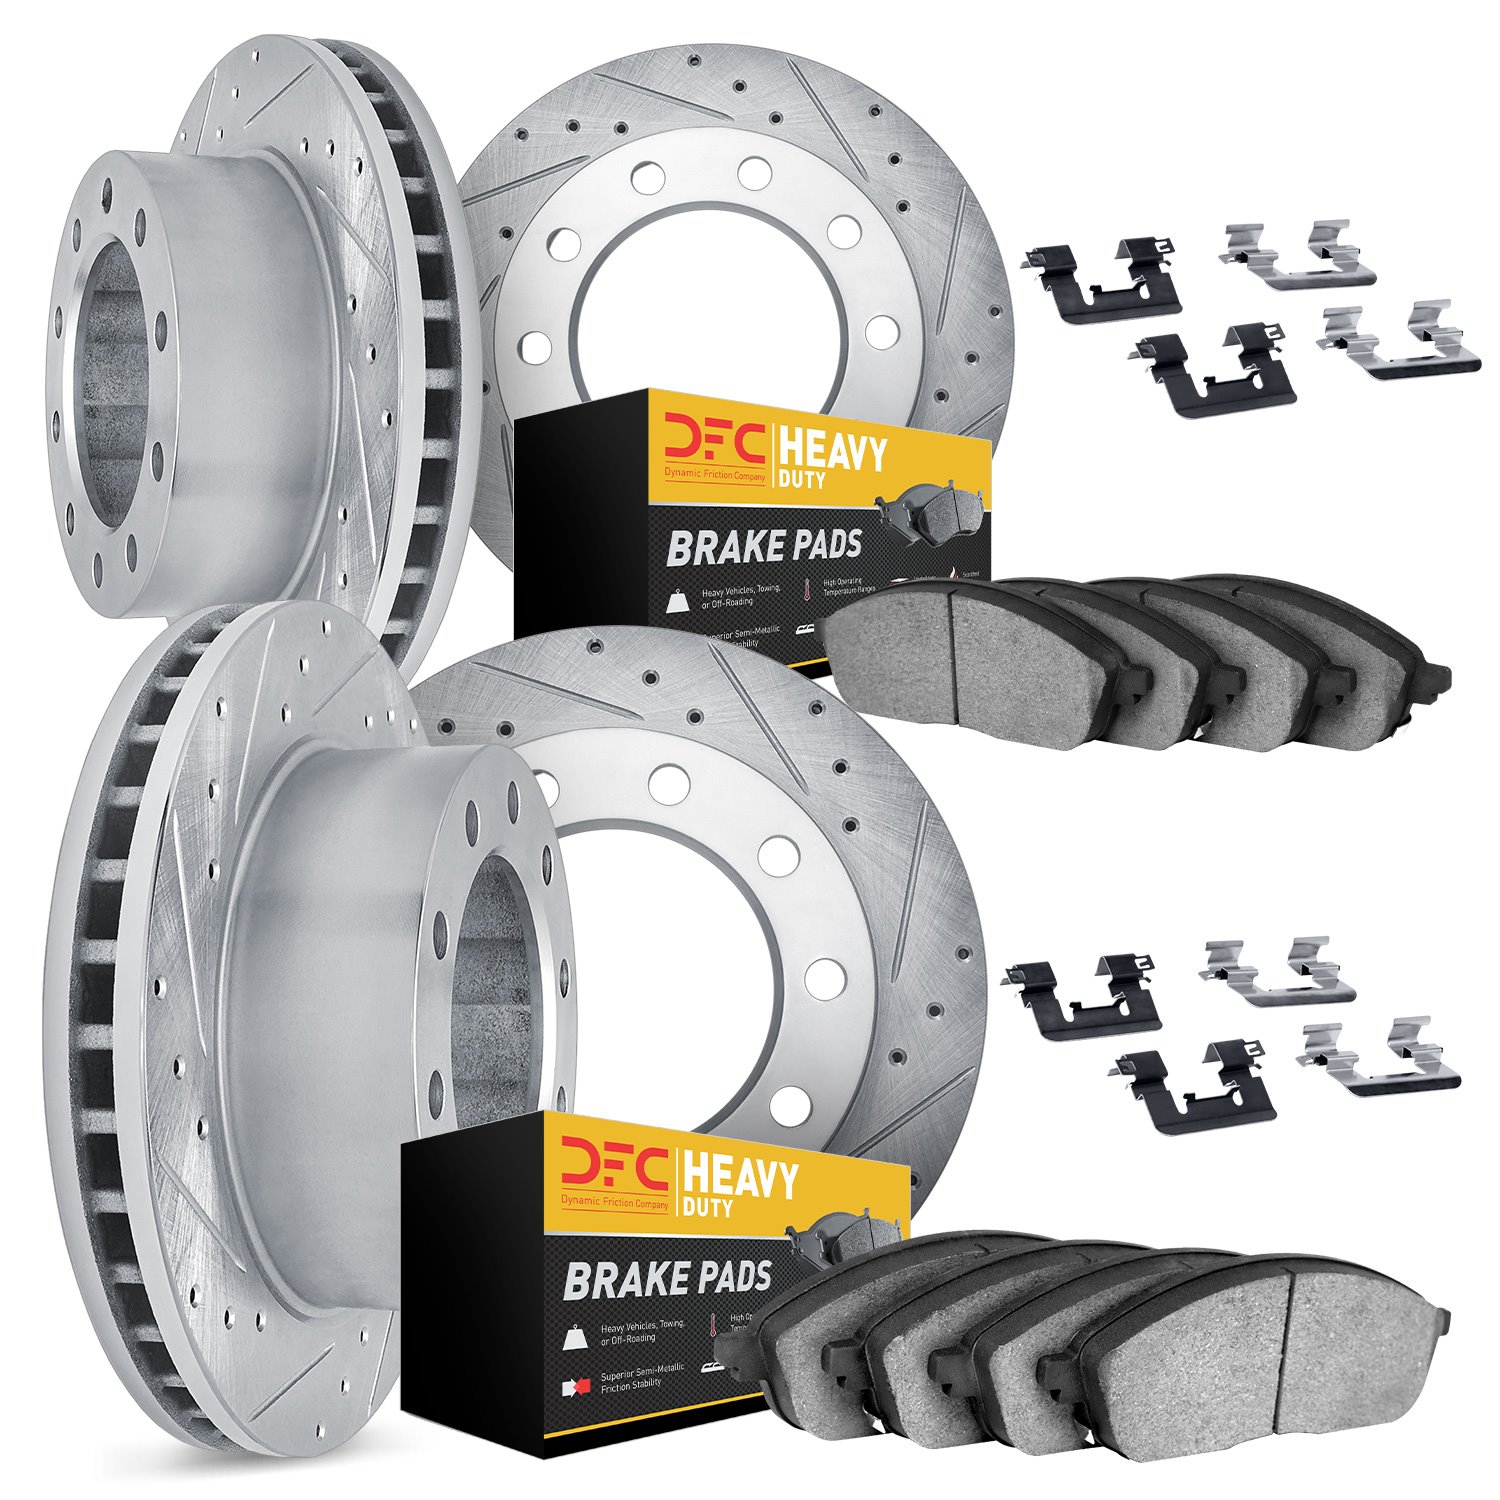 7214-99045 Drilled/Slotted Rotors w/Heavy-Duty Brake Pads Kit & Hardware [Silver], 2006-2009 Ford/Lincoln/Mercury/Mazda, Positio